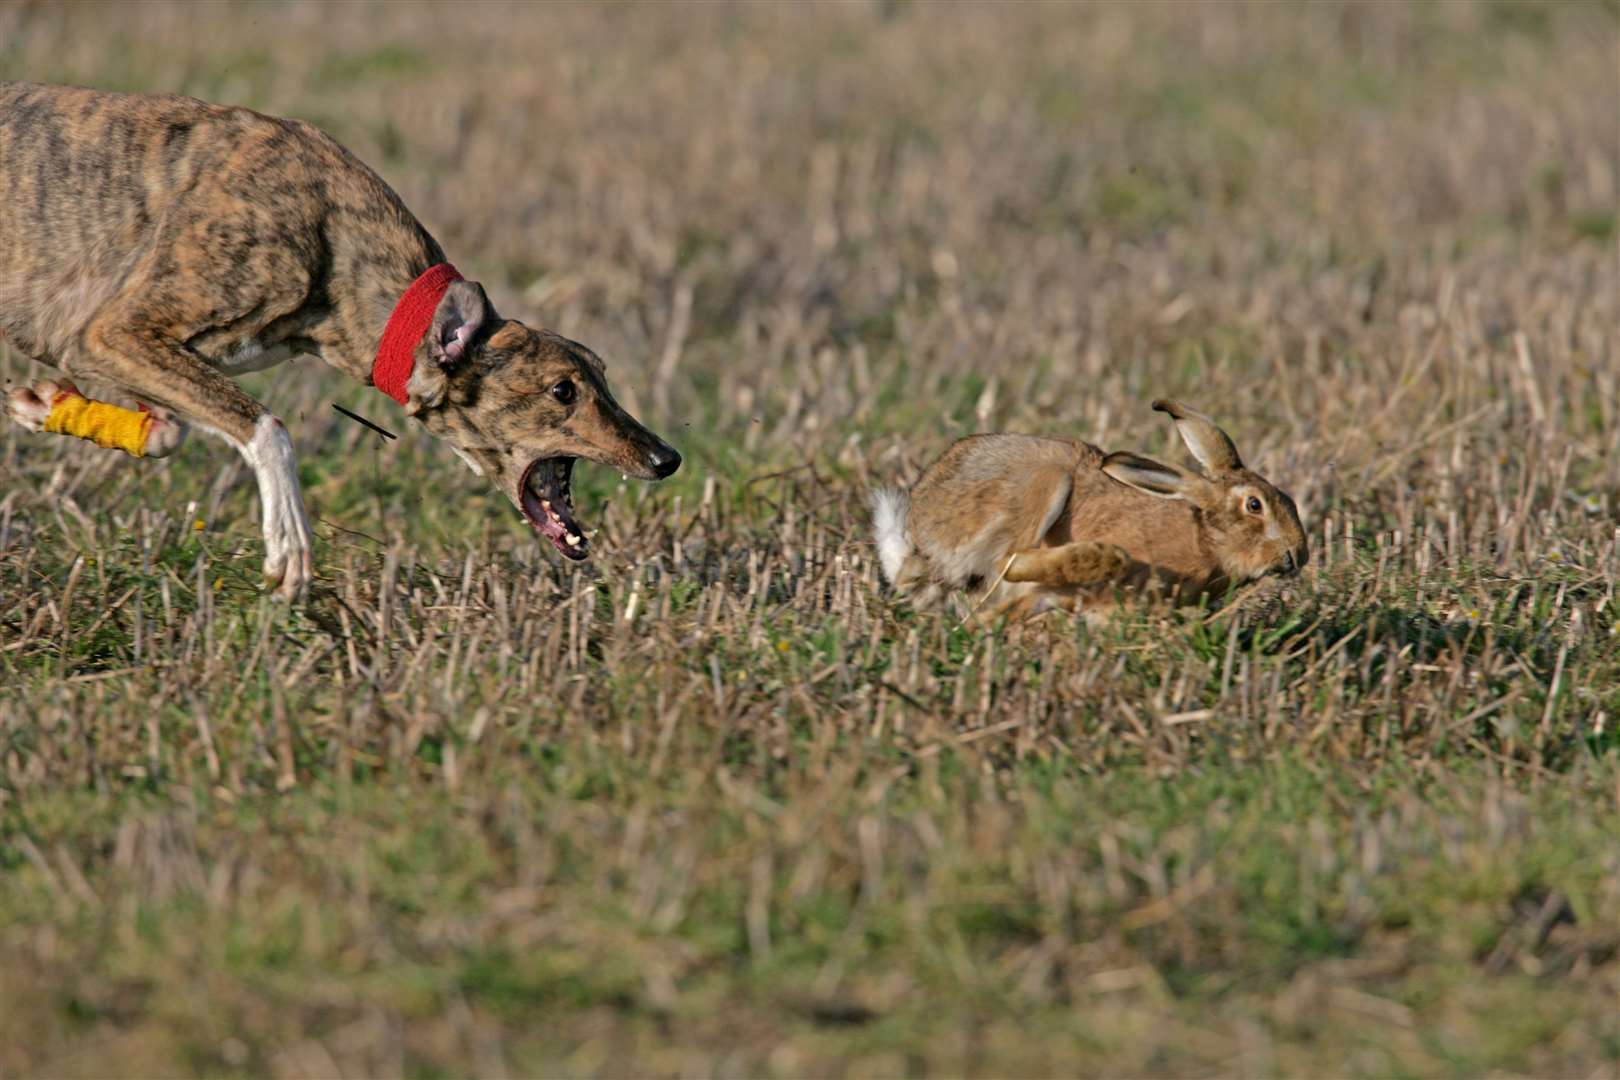 Reports of hare coursing have fallen Picture: Stock